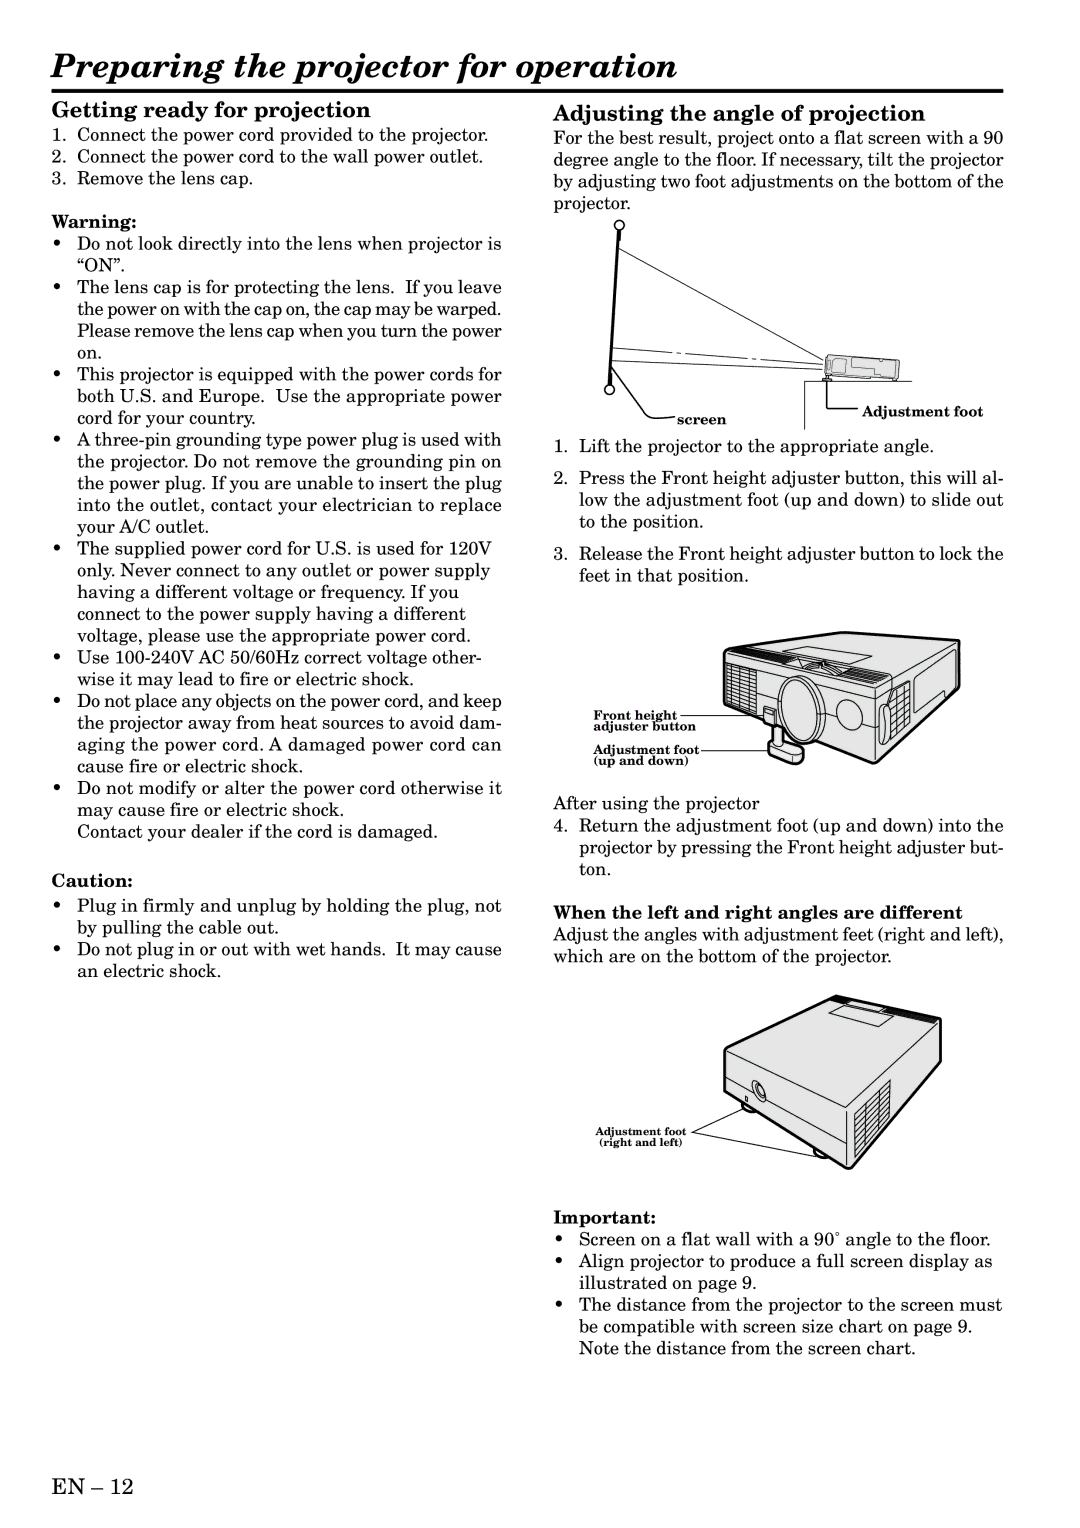 Mitsubishi Electronics SA51 user manual Preparing the projector for operation, Getting ready for projection 